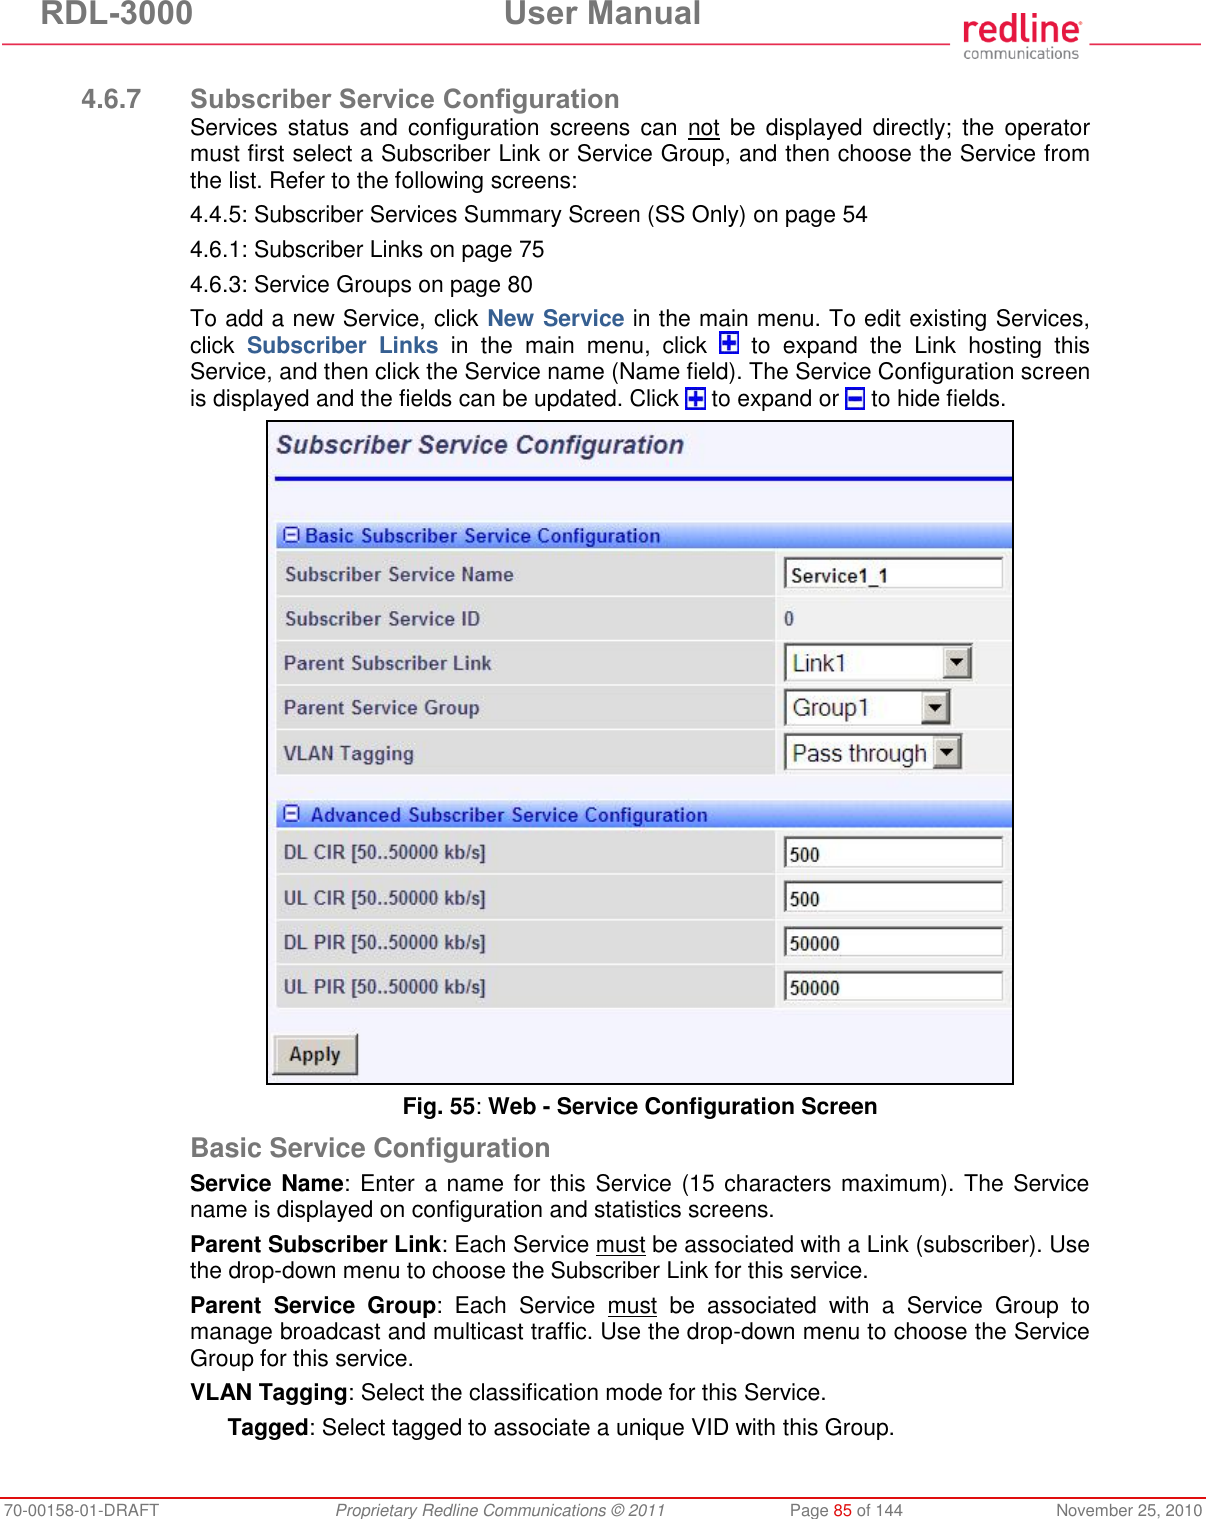 RDL-3000  User Manual 70-00158-01-DRAFT  Proprietary Redline Communications © 2011  Page 85 of 144  November 25, 2010  4.6.7 Subscriber Service Configuration Services status  and  configuration screens  can  not  be  displayed  directly;  the  operator must first select a Subscriber Link or Service Group, and then choose the Service from the list. Refer to the following screens: 4.4.5: Subscriber Services Summary Screen (SS Only) on page 54 4.6.1: Subscriber Links on page 75 4.6.3: Service Groups on page 80 To add a new Service, click New Service in the main menu. To edit existing Services, click  Subscriber  Links  in  the  main  menu,  click    to  expand  the  Link  hosting  this Service, and then click the Service name (Name field). The Service Configuration screen is displayed and the fields can be updated. Click   to expand or   to hide fields.  Fig. 55: Web - Service Configuration Screen Basic Service Configuration Service Name:  Enter a name for this Service (15 characters maximum). The  Service name is displayed on configuration and statistics screens. Parent Subscriber Link: Each Service must be associated with a Link (subscriber). Use the drop-down menu to choose the Subscriber Link for this service. Parent  Service  Group:  Each  Service  must  be  associated  with  a  Service  Group  to manage broadcast and multicast traffic. Use the drop-down menu to choose the Service Group for this service. VLAN Tagging: Select the classification mode for this Service. Tagged: Select tagged to associate a unique VID with this Group. 